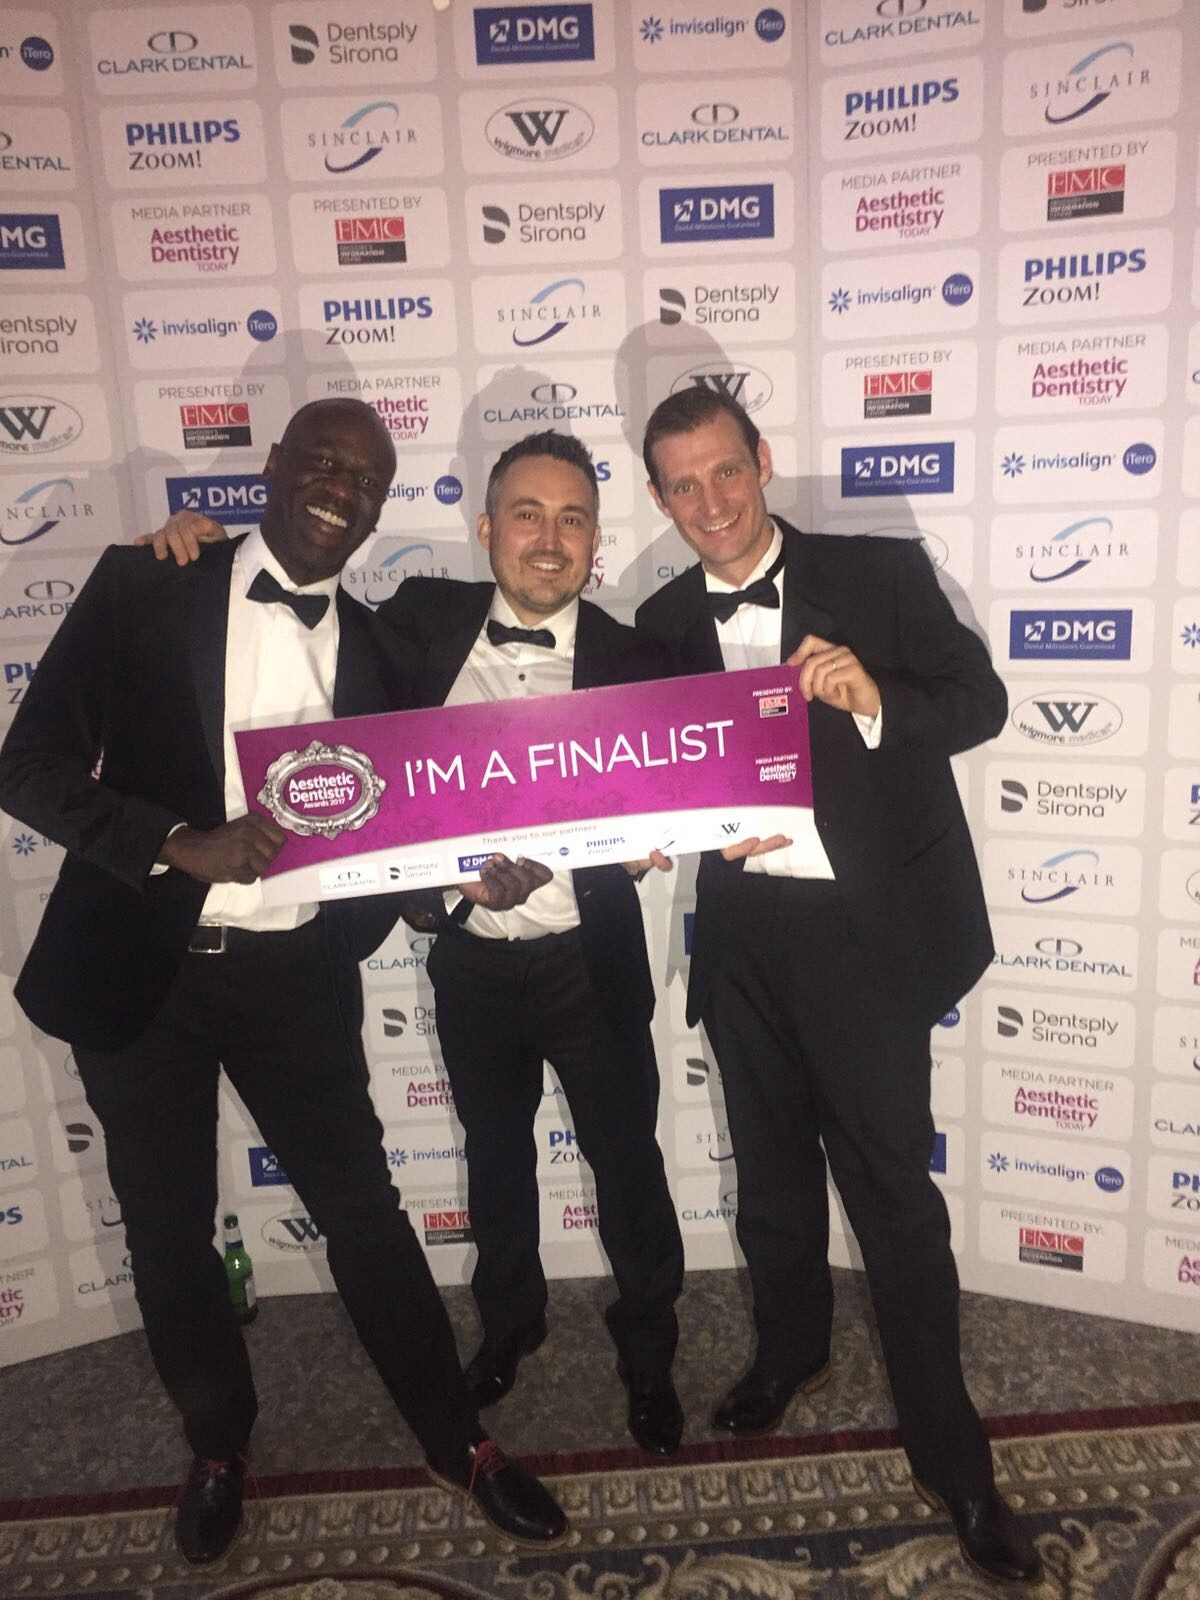 Ten Implant Centre proud of Aesthetic Dentistry Awards recognition